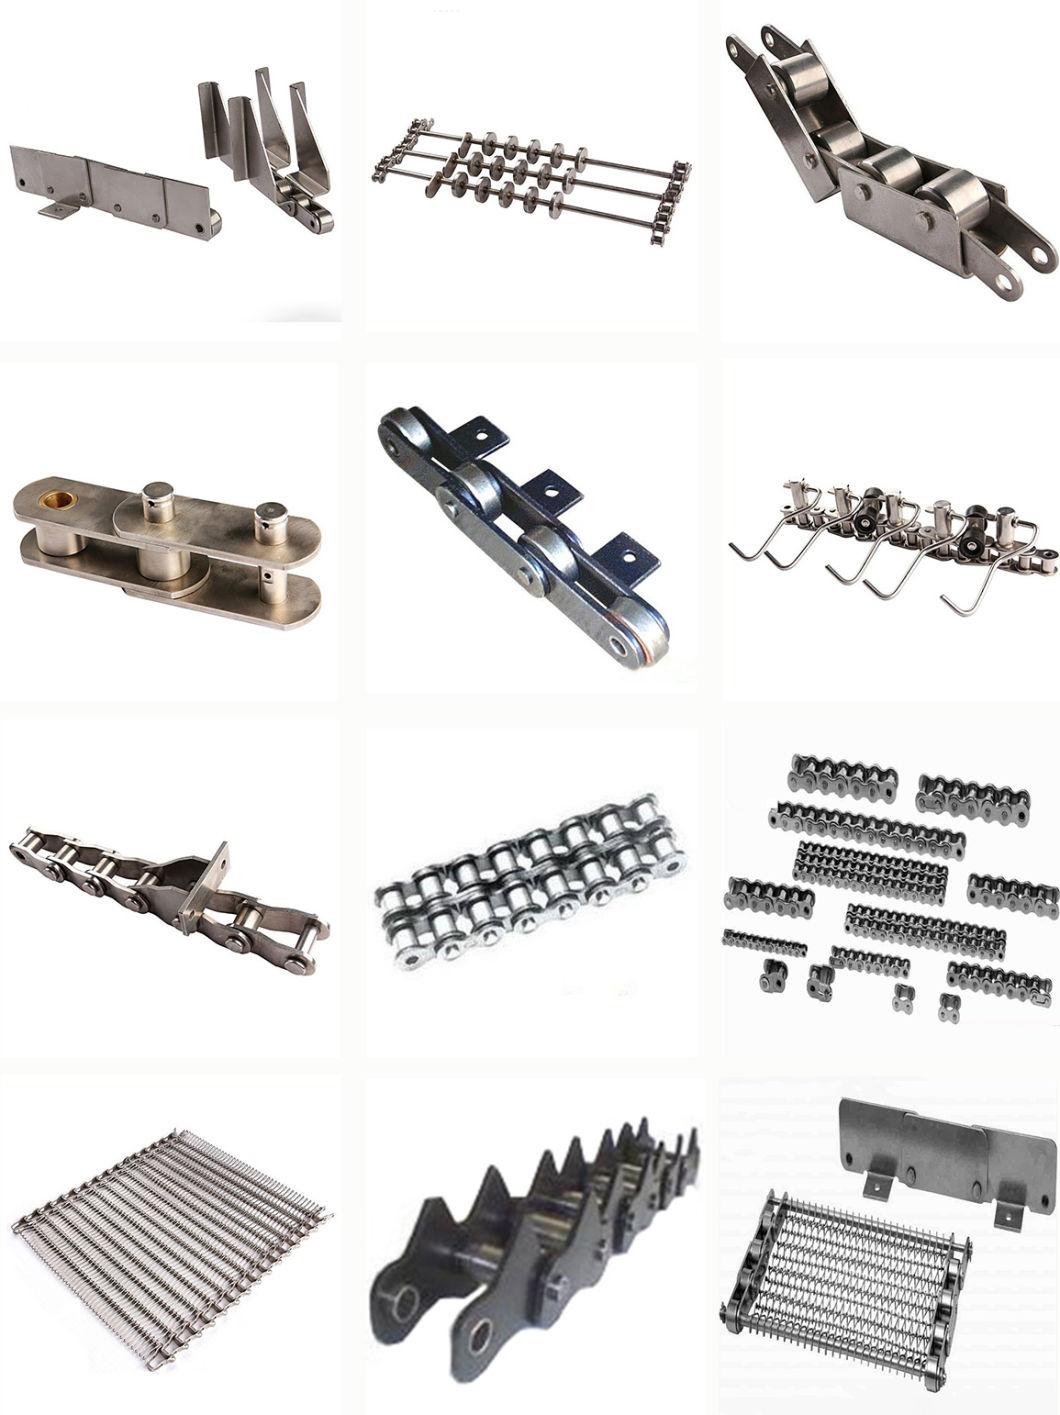 Strong Corrosion Resistance Stainless Steel Double Pitch Conveyor Chain with Extended Pins